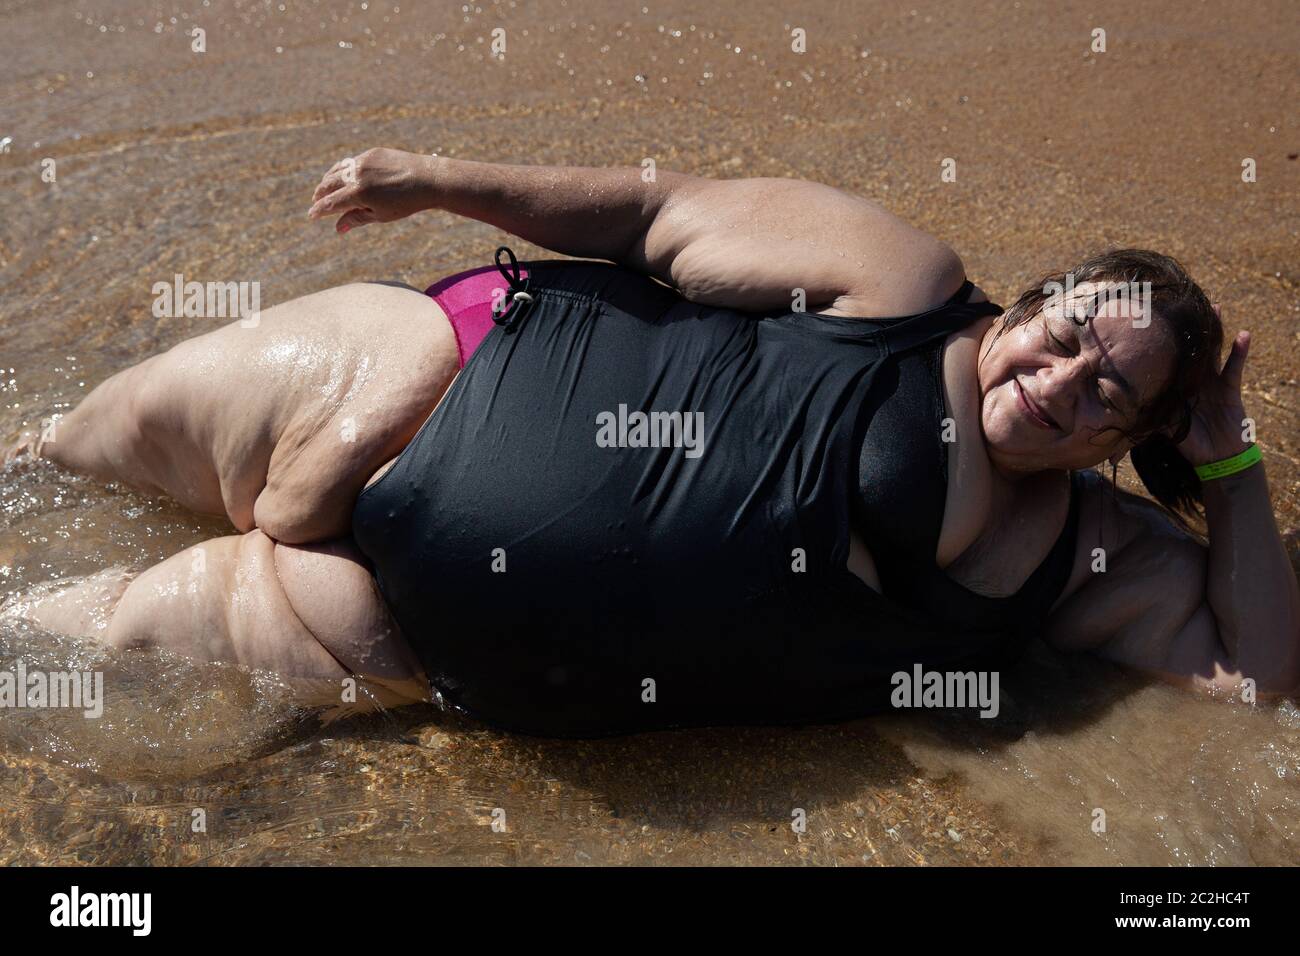 Marbella lies on the beach in Acapulco, Mexico on September 7, 2013. Marbella Aguilar Sosa is a 57-year-old Mexican woman with morbid obesity. She suf Stock Photo